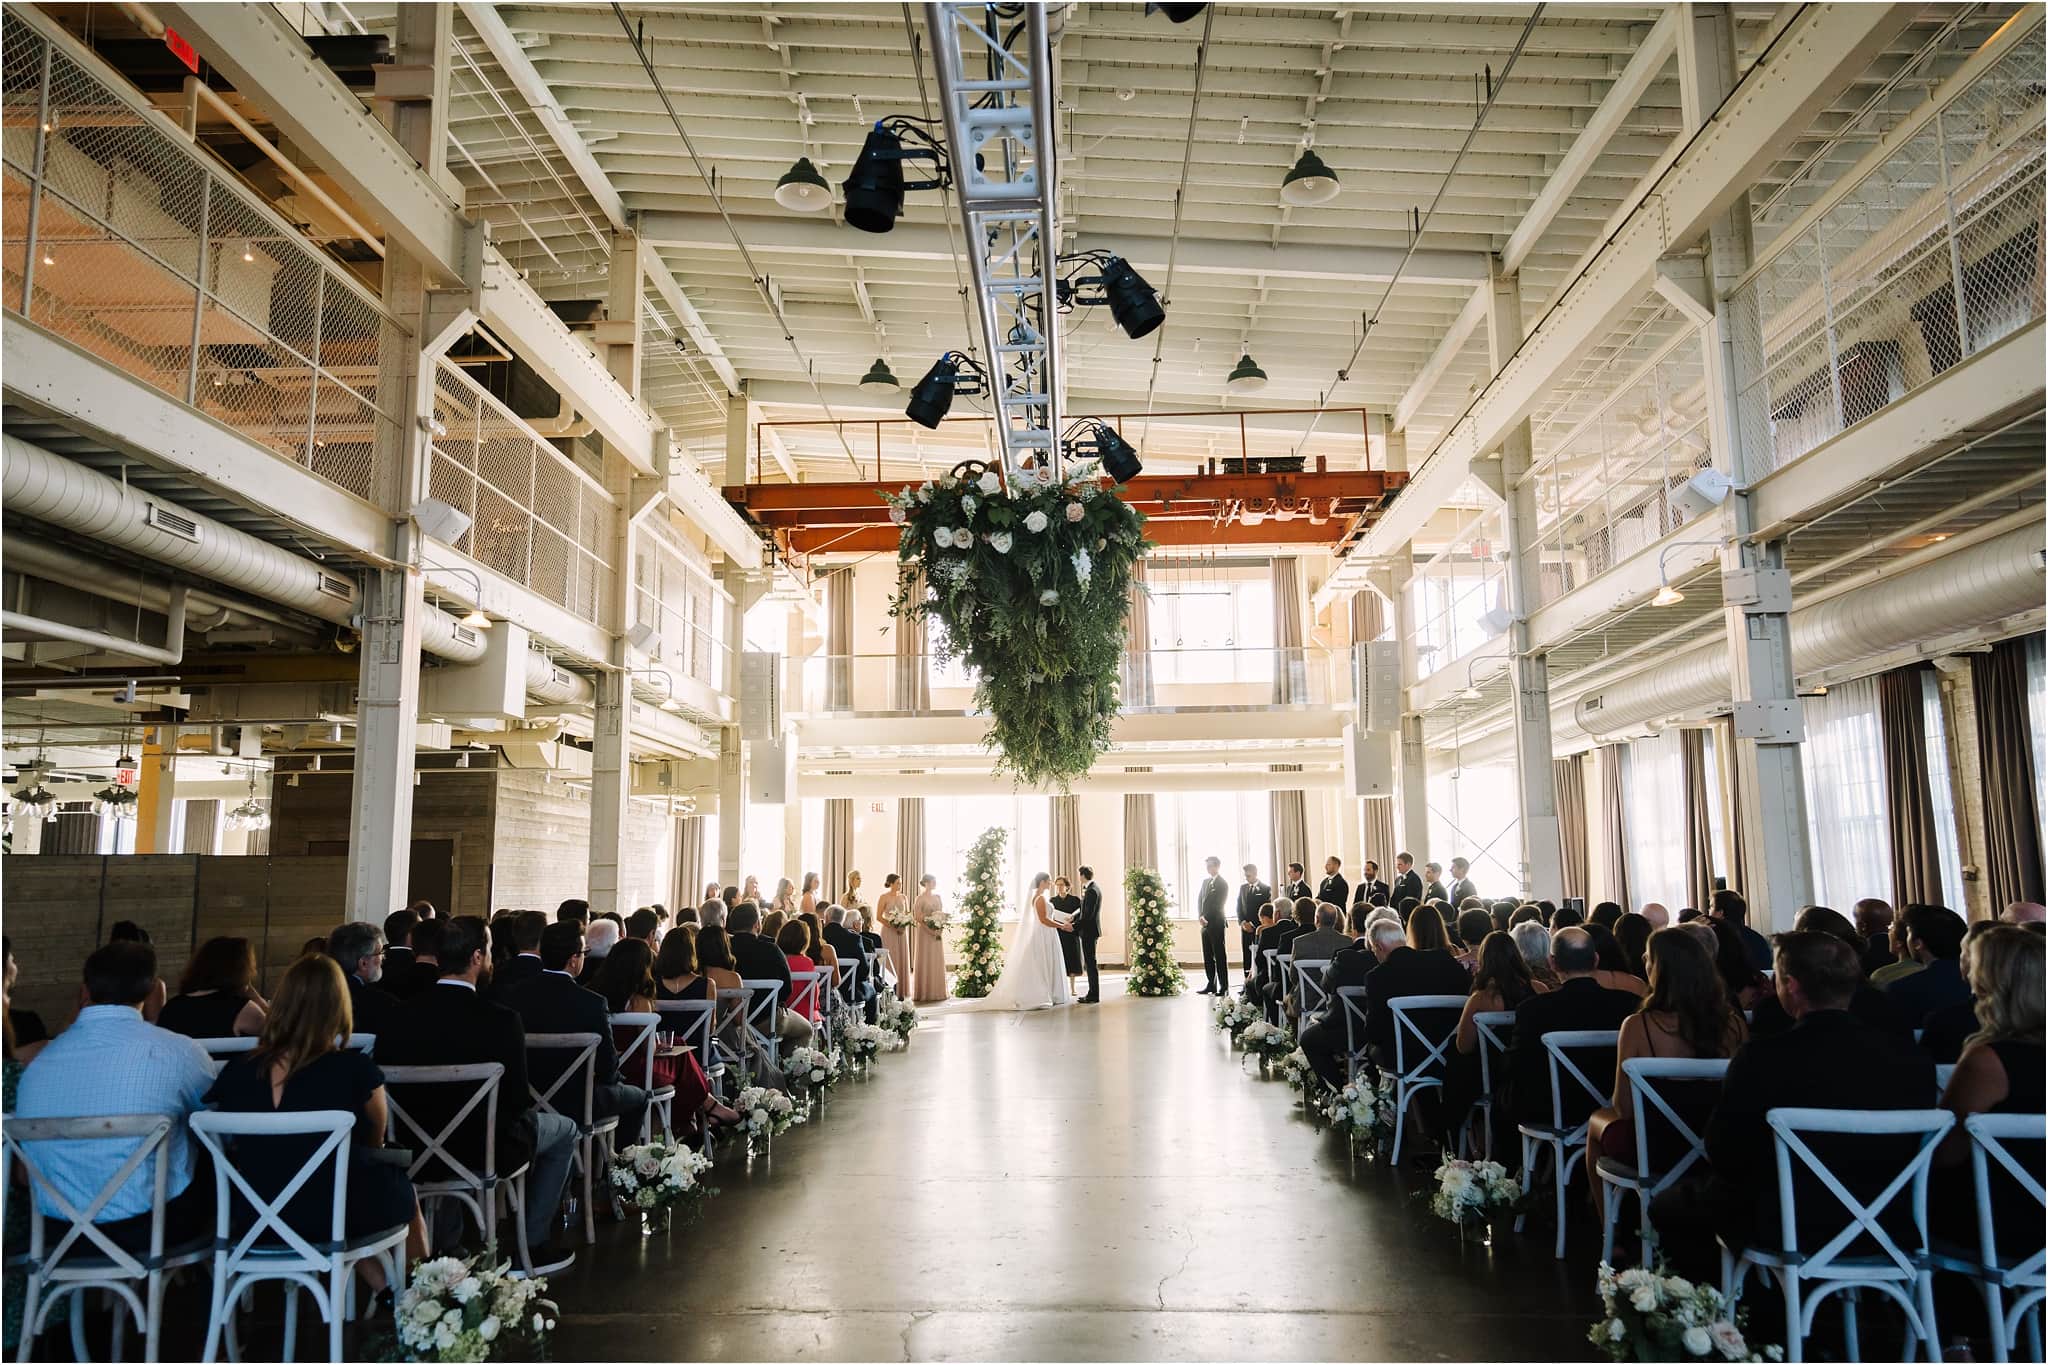  Industrial and ample space at the Machine Shop Wedding venue in Minneapolis